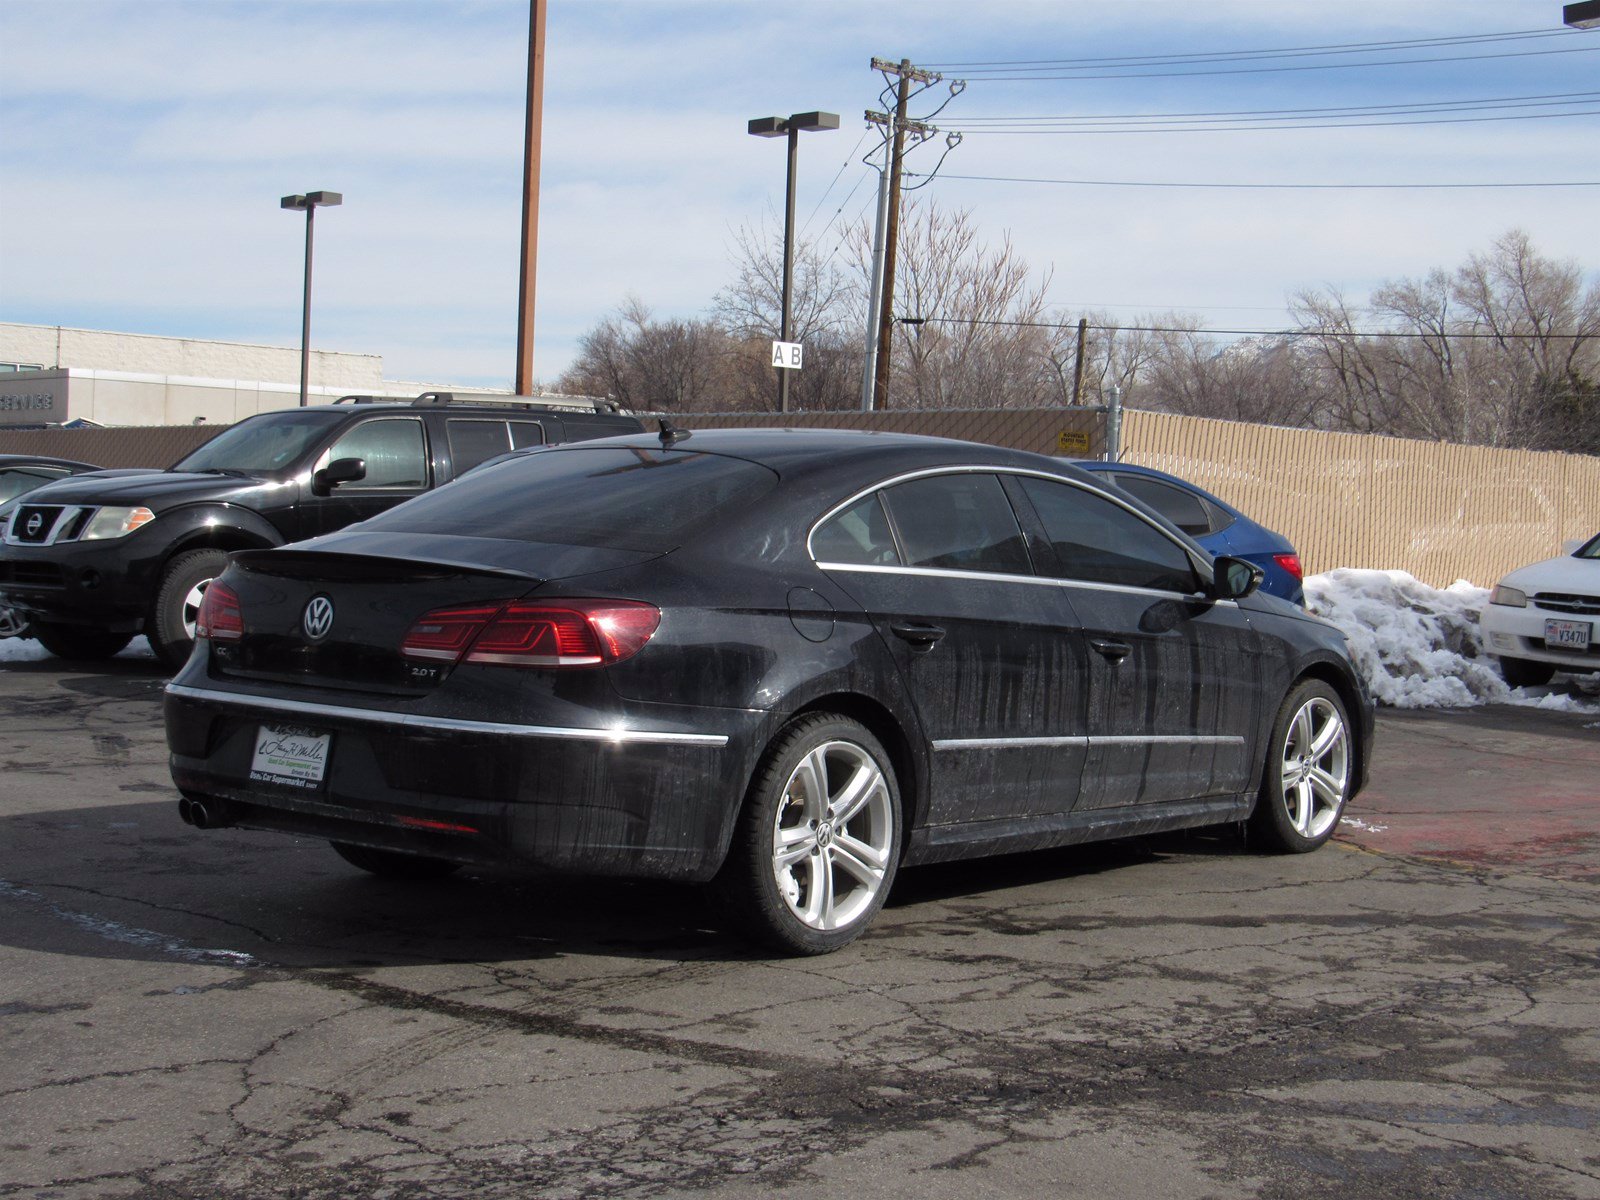 PreOwned 2014 Volkswagen CC 2.0T Sport 4dr Car in Sandy 